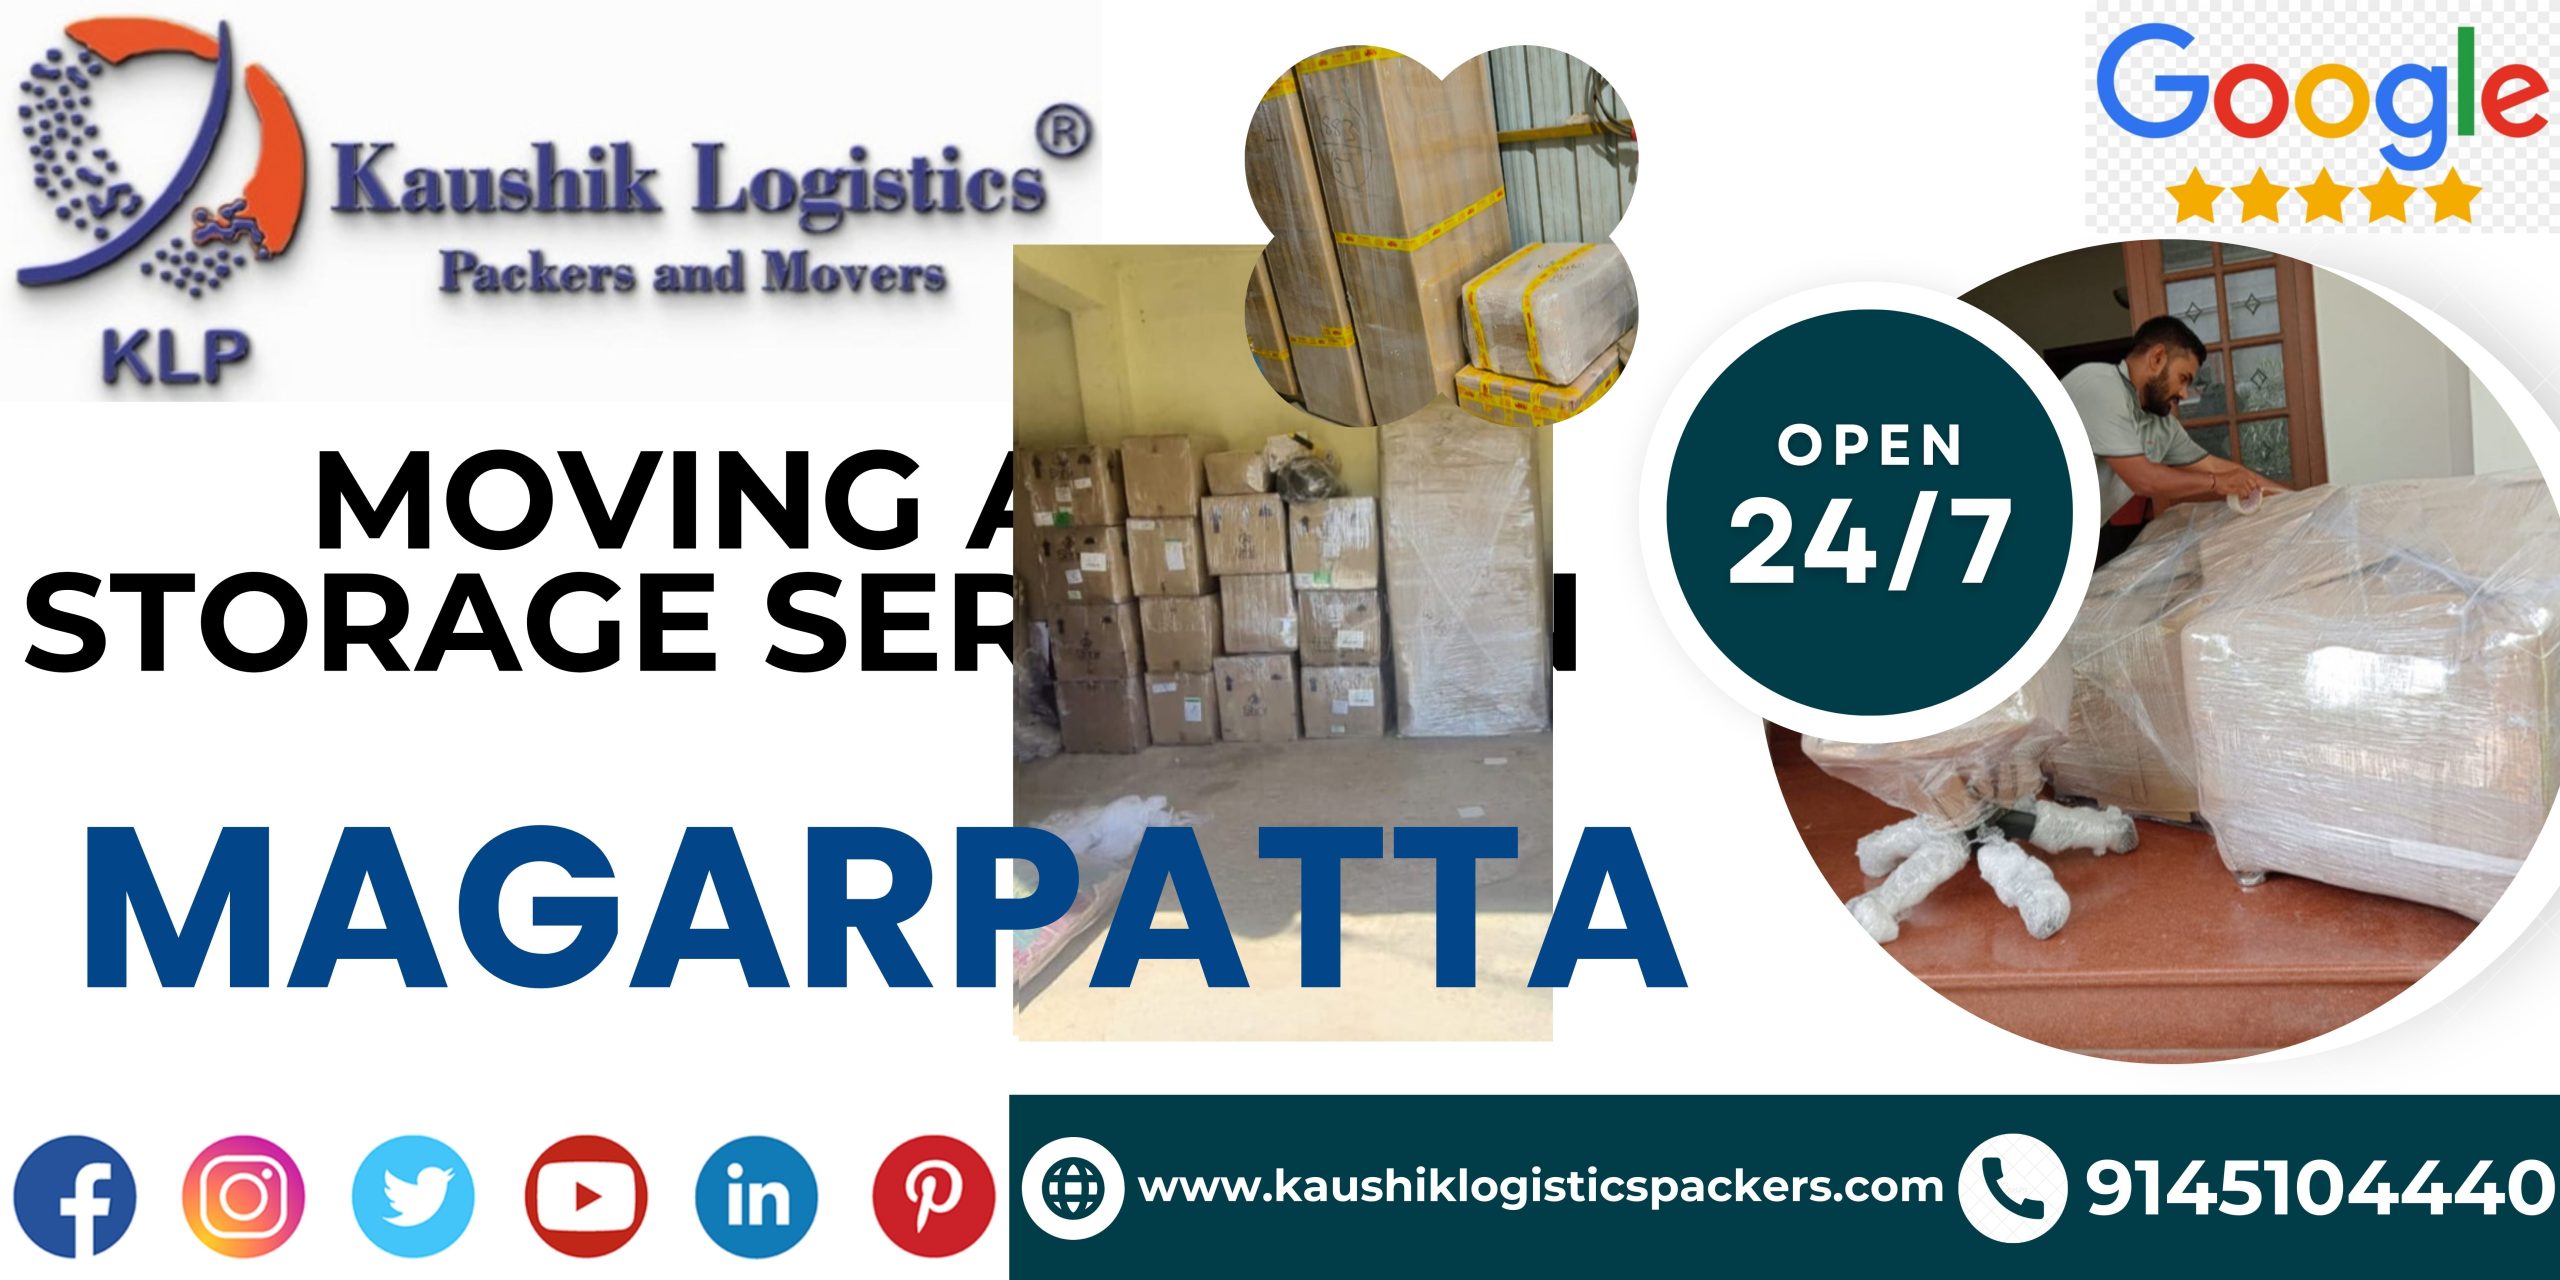 Packers and Movers In Magarpatta